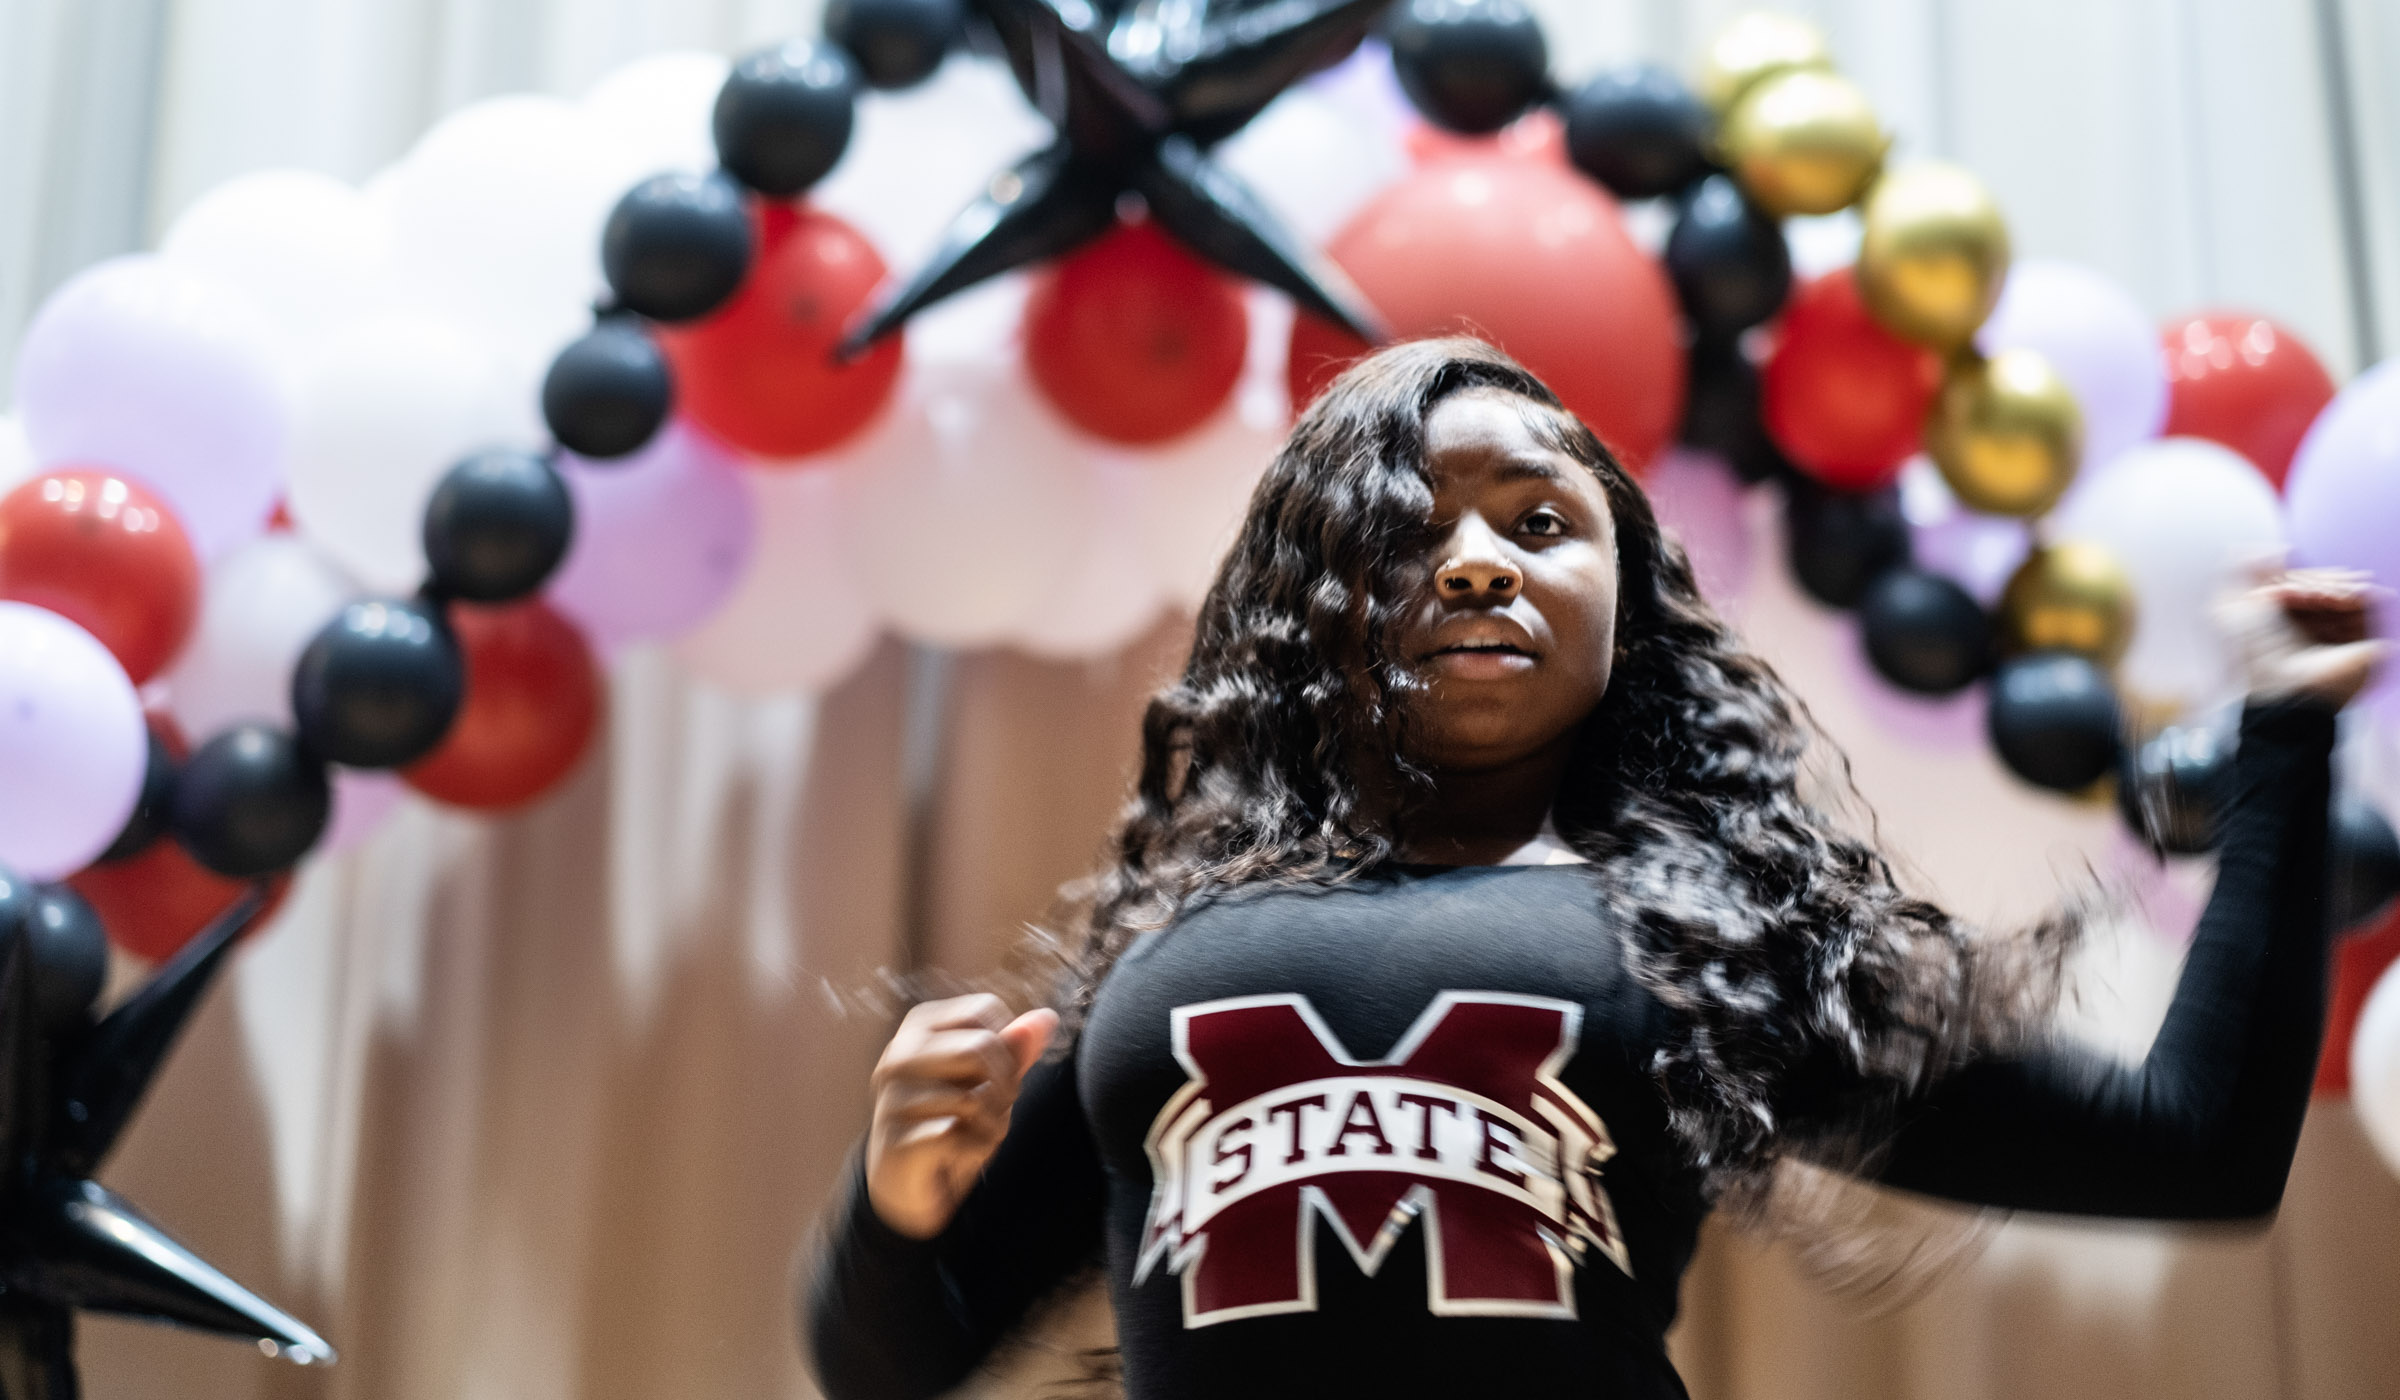 Wearing a long sleeved black unitard with an MState logo in the middle, Breanna Spencer, performs her &quot;hip-hop majorette&quot; performance with an arch of balloons against the stage curtain behind her.